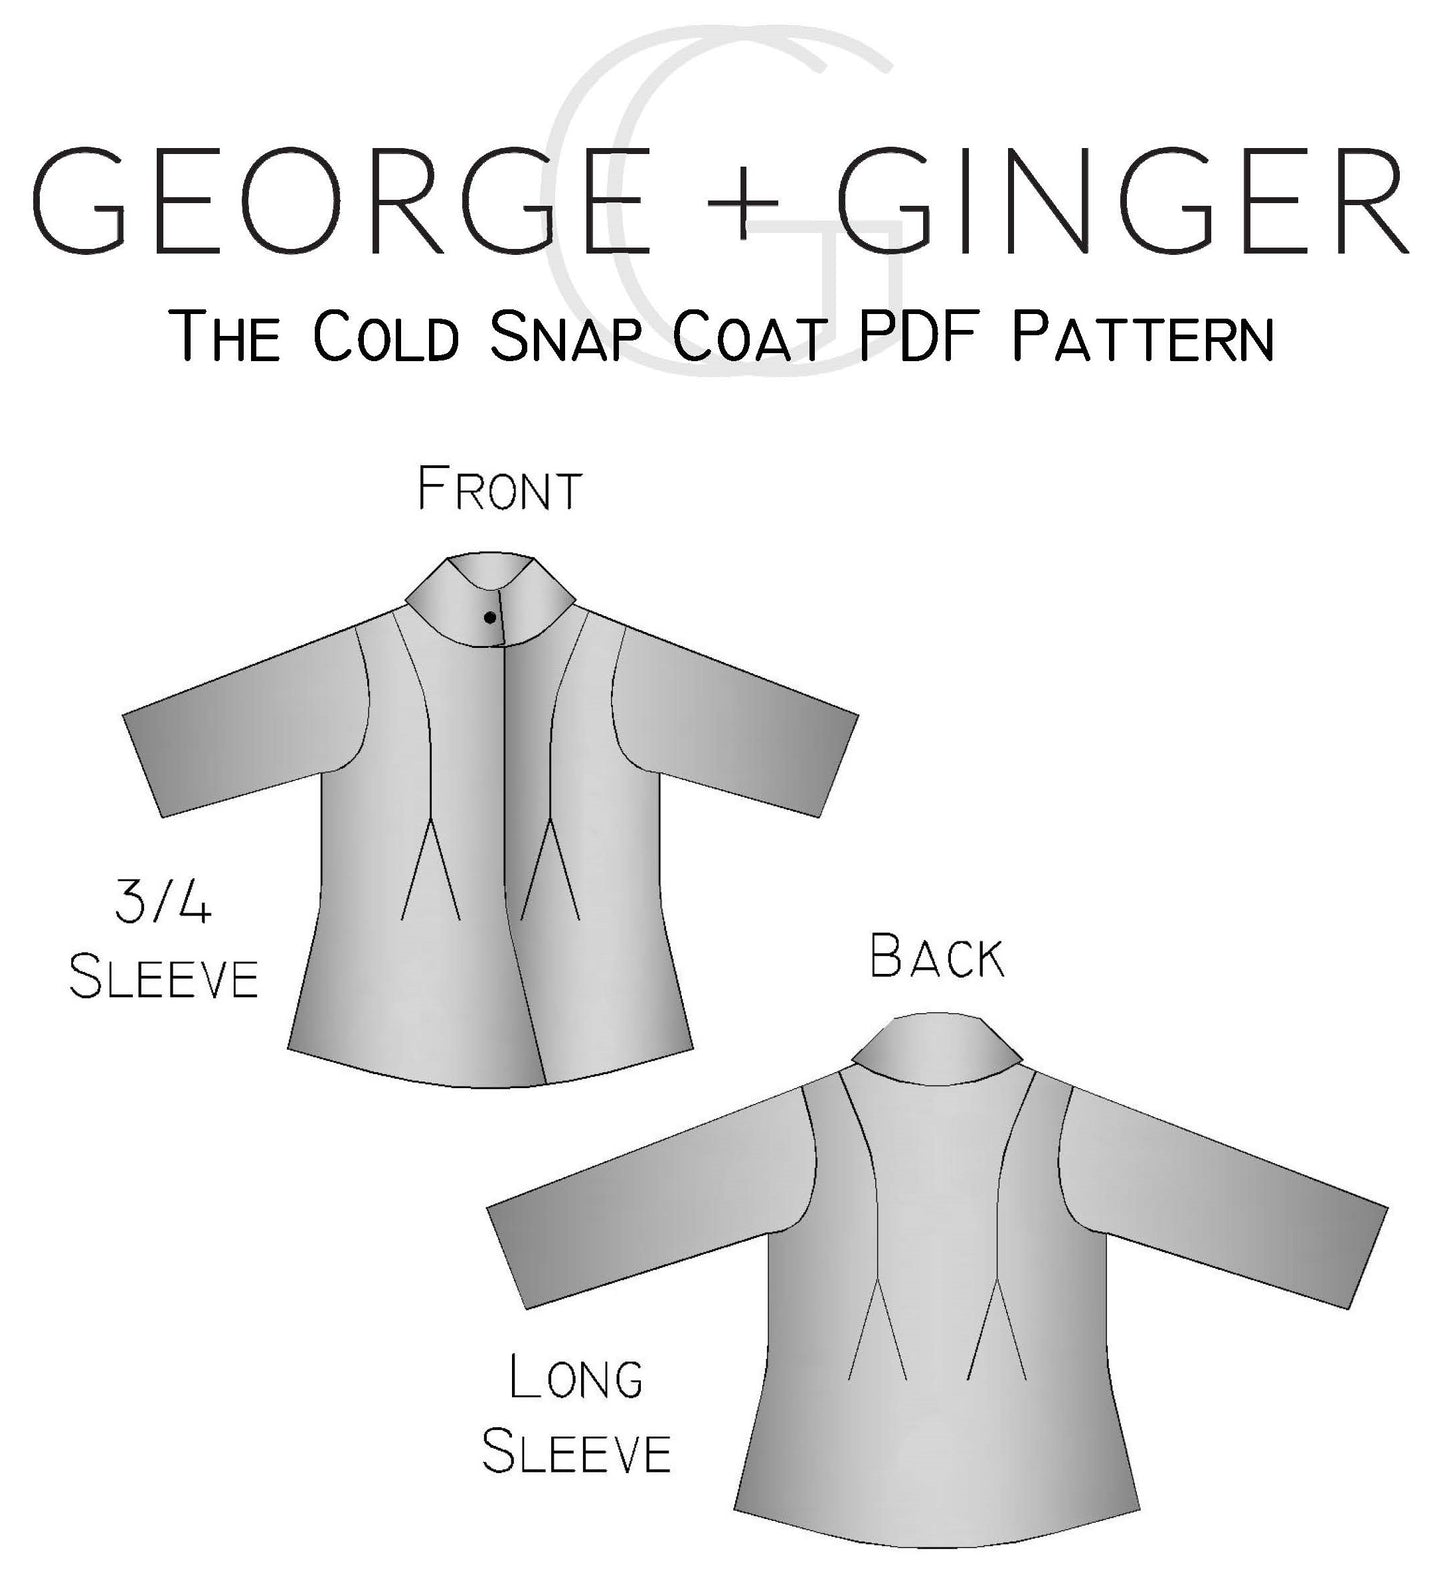 The Cold Snap Coat PDF Sewing Pattern